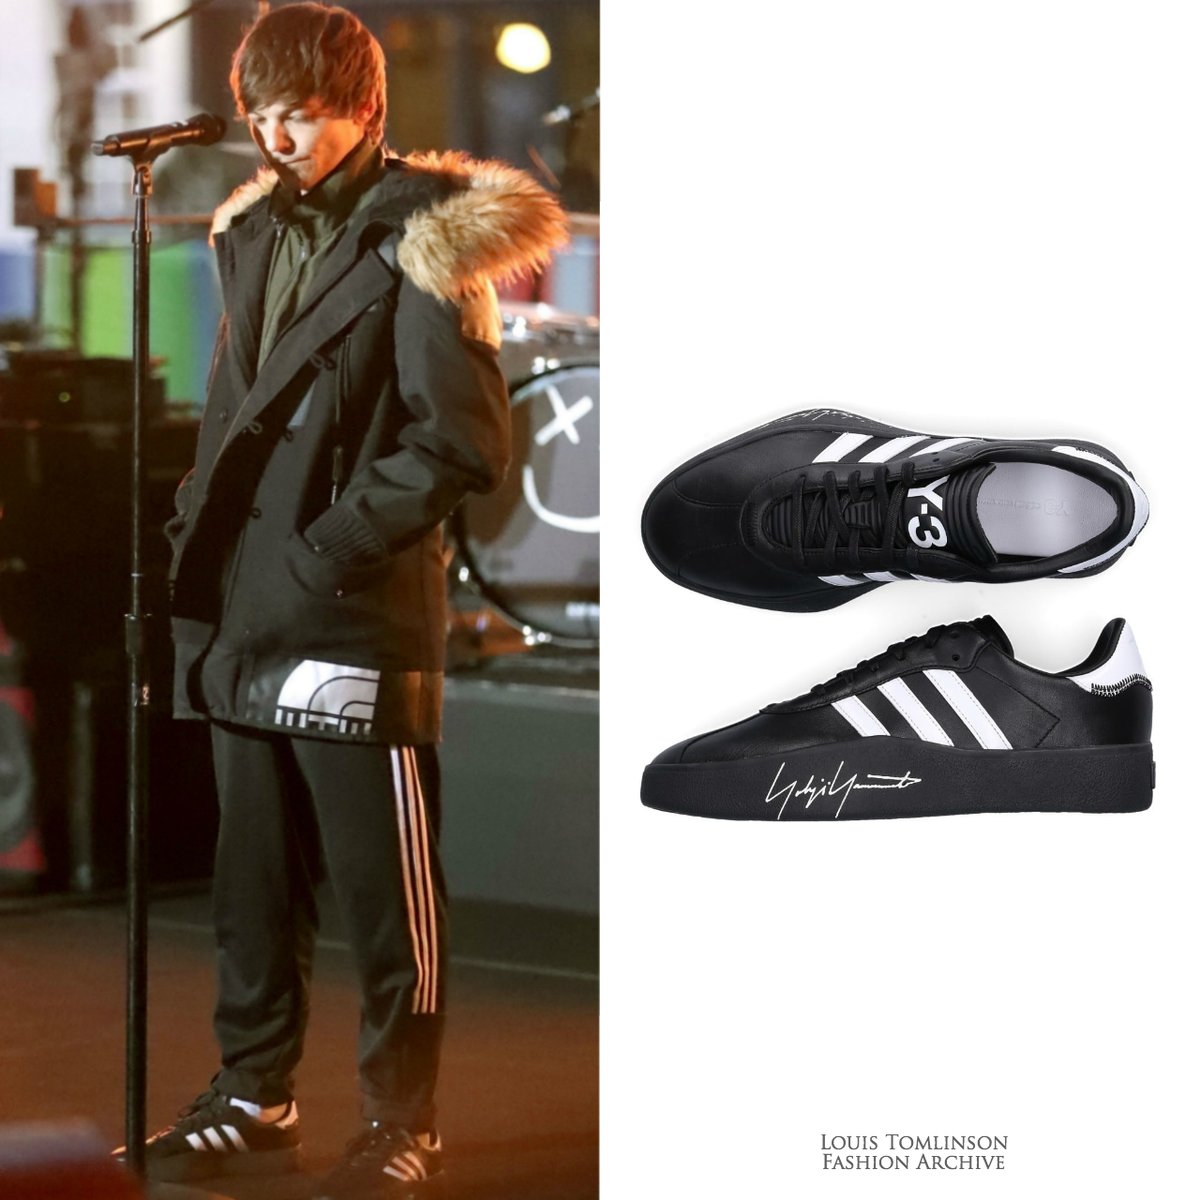 Observación Cervecería analizar Louis Tomlinson Fashion Archive on Twitter: "01/22/20 | Louis wore @adidas  Y3 Tangutsu sneakers ($150) for @BBCTheOneShow https://t.co/dtrwzRshMt  https://t.co/8YKv2gOUcY" / Twitter